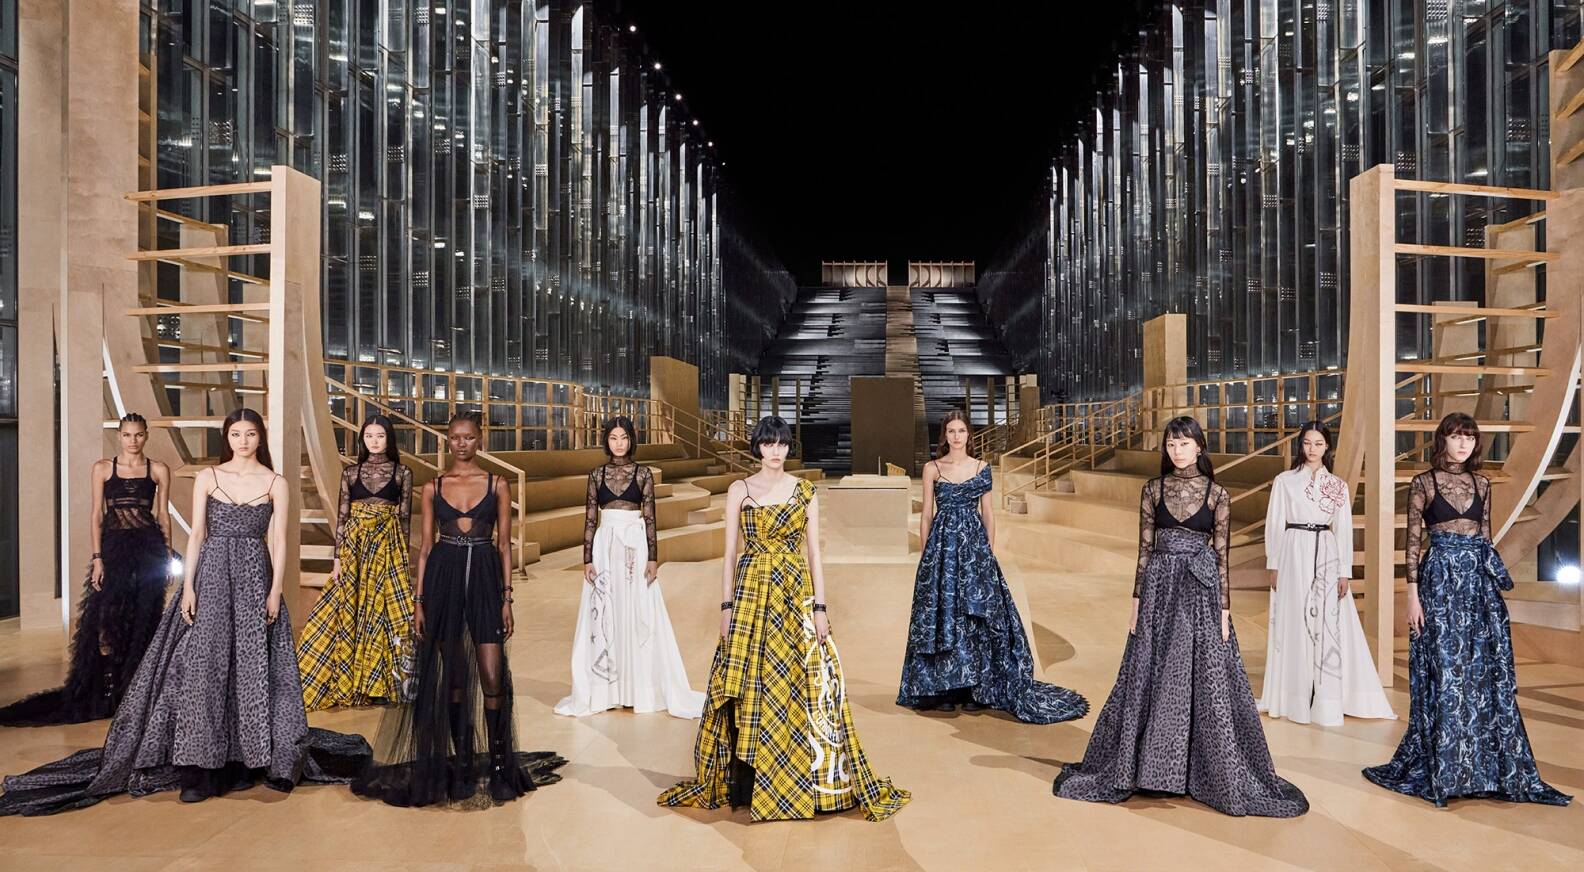 Dior Fall 2022 Women's collection celebrates facets of femininity - LVMH